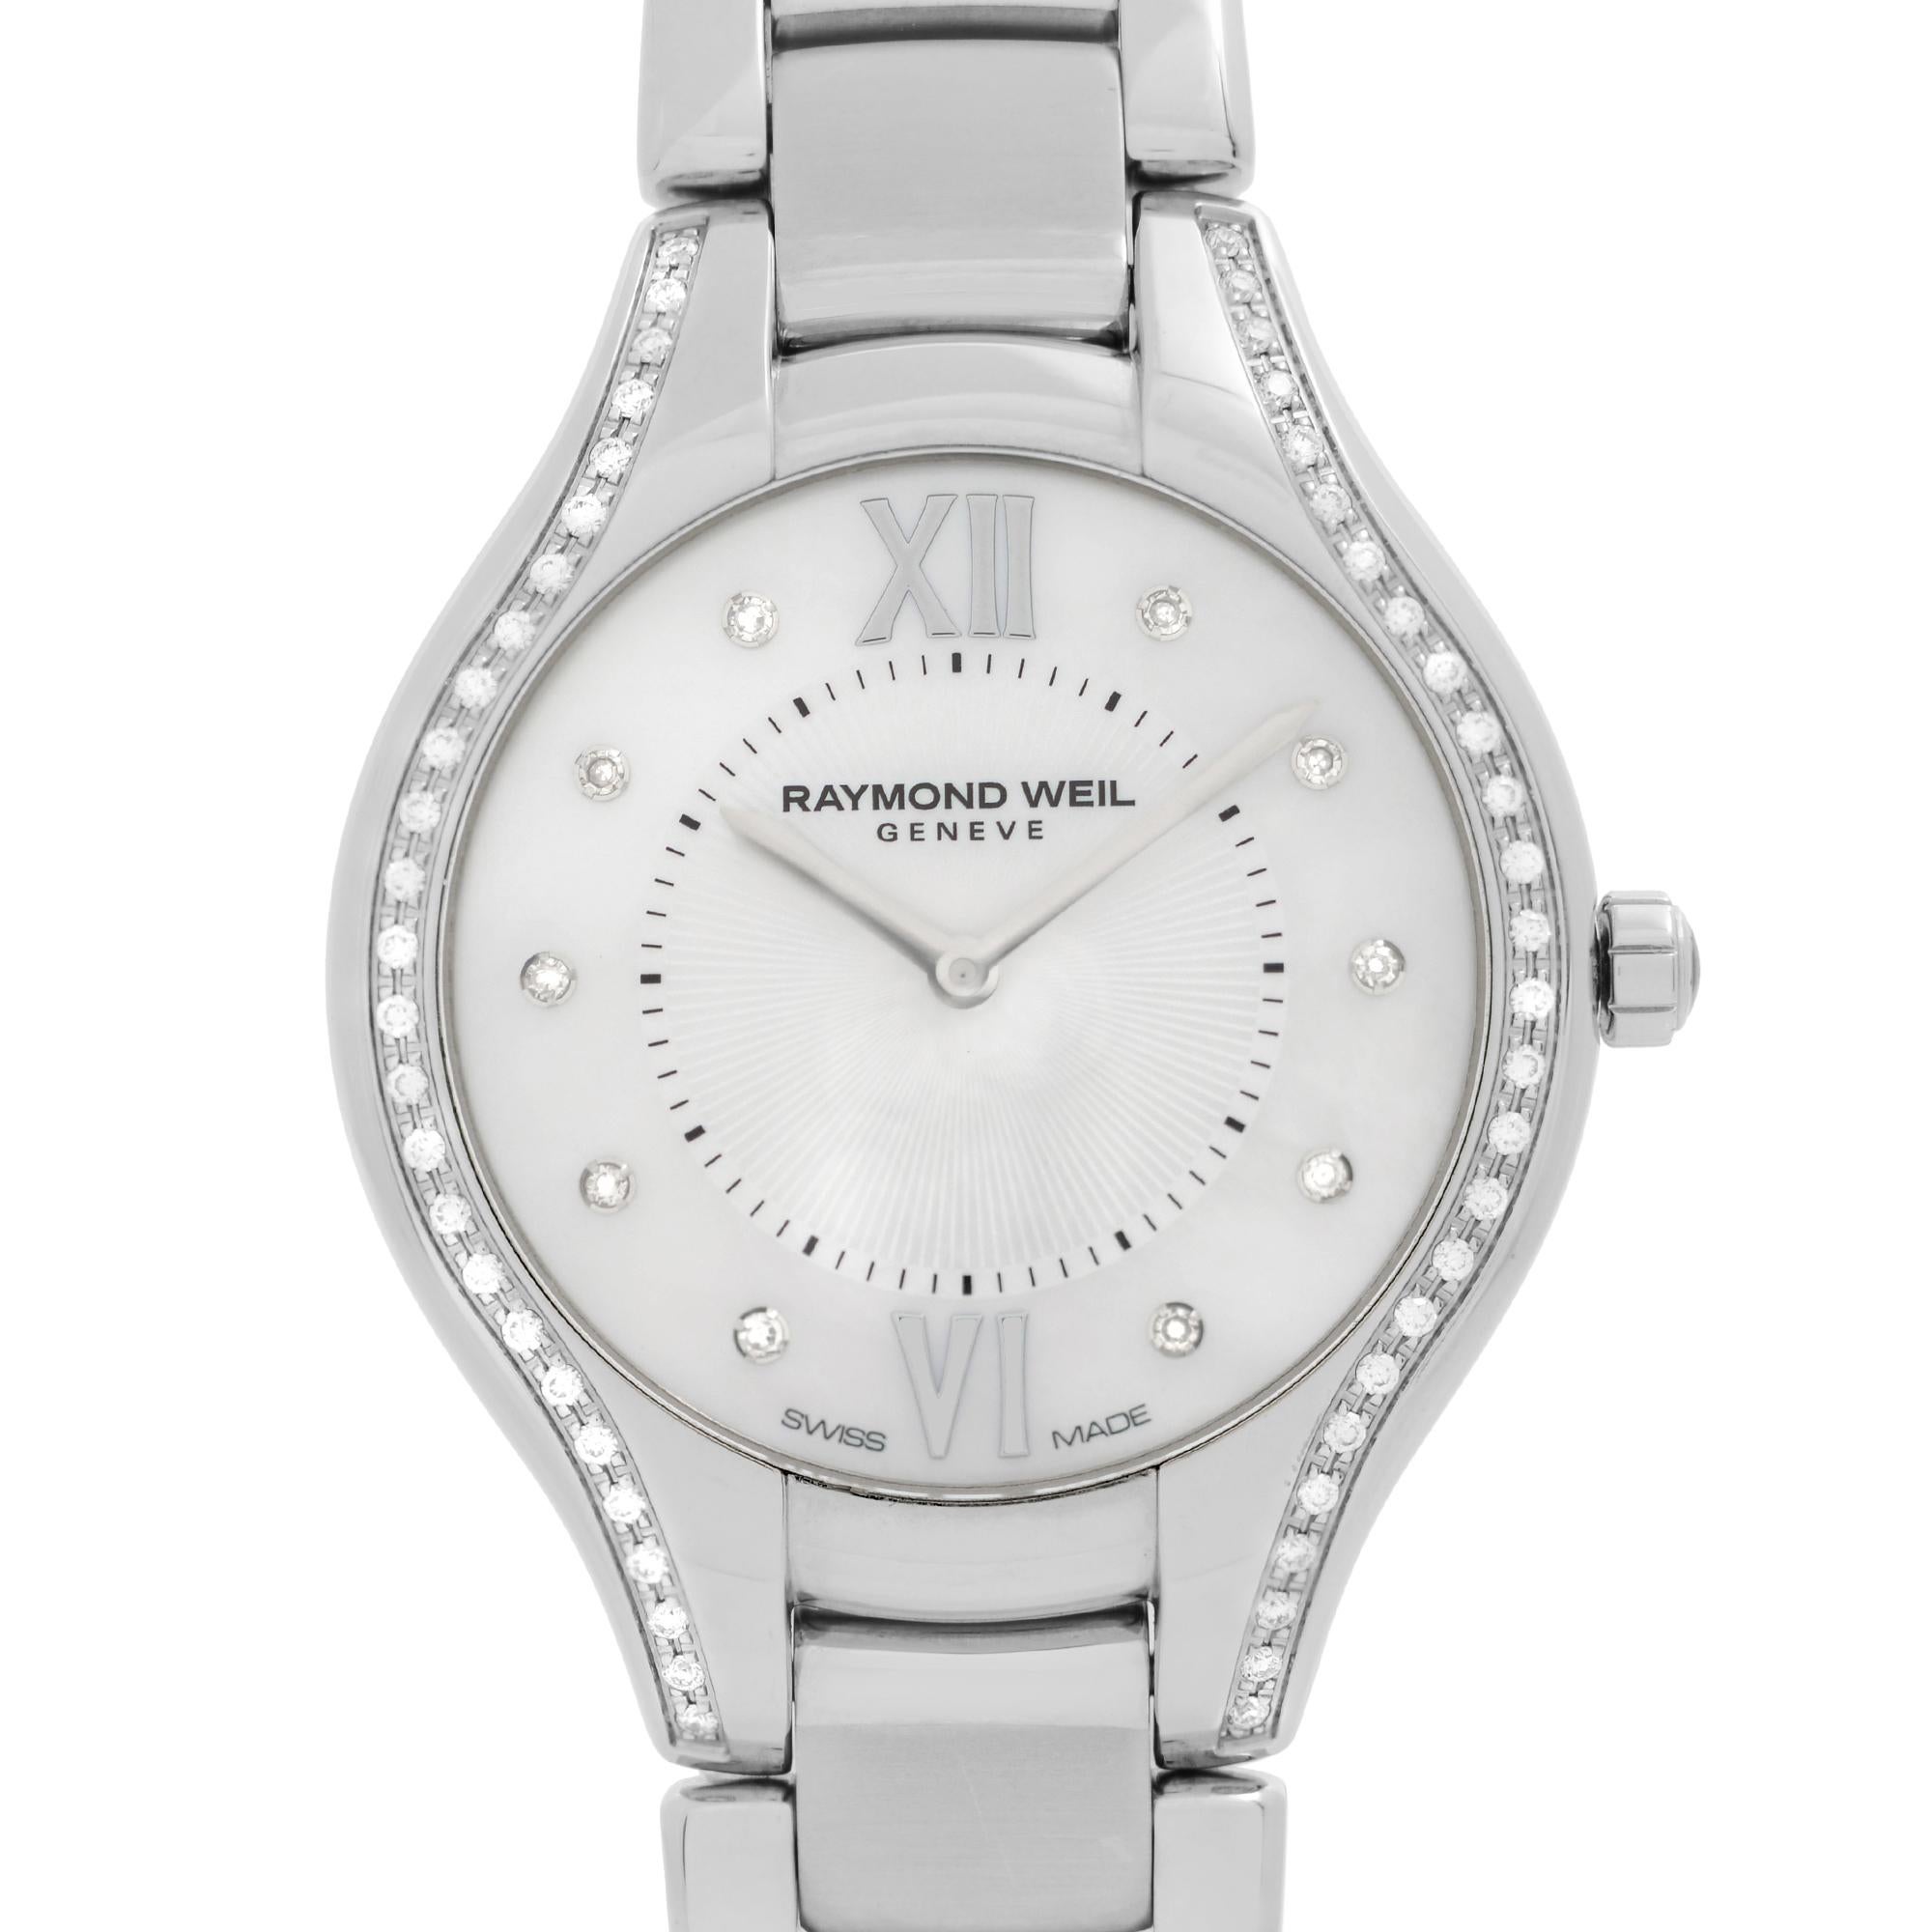 Never Worn Raymond Weil Noemia Steel Diamond MOP Dial Quartz Ladies Watch 5132-STS-00985. This Beautiful Timepiece Features: Stainless Steel Case and Bracelet, Fixed Stainless Steel Bezel Set with Diamonds, Mother-of-Pearl Dial with Silver-Tone